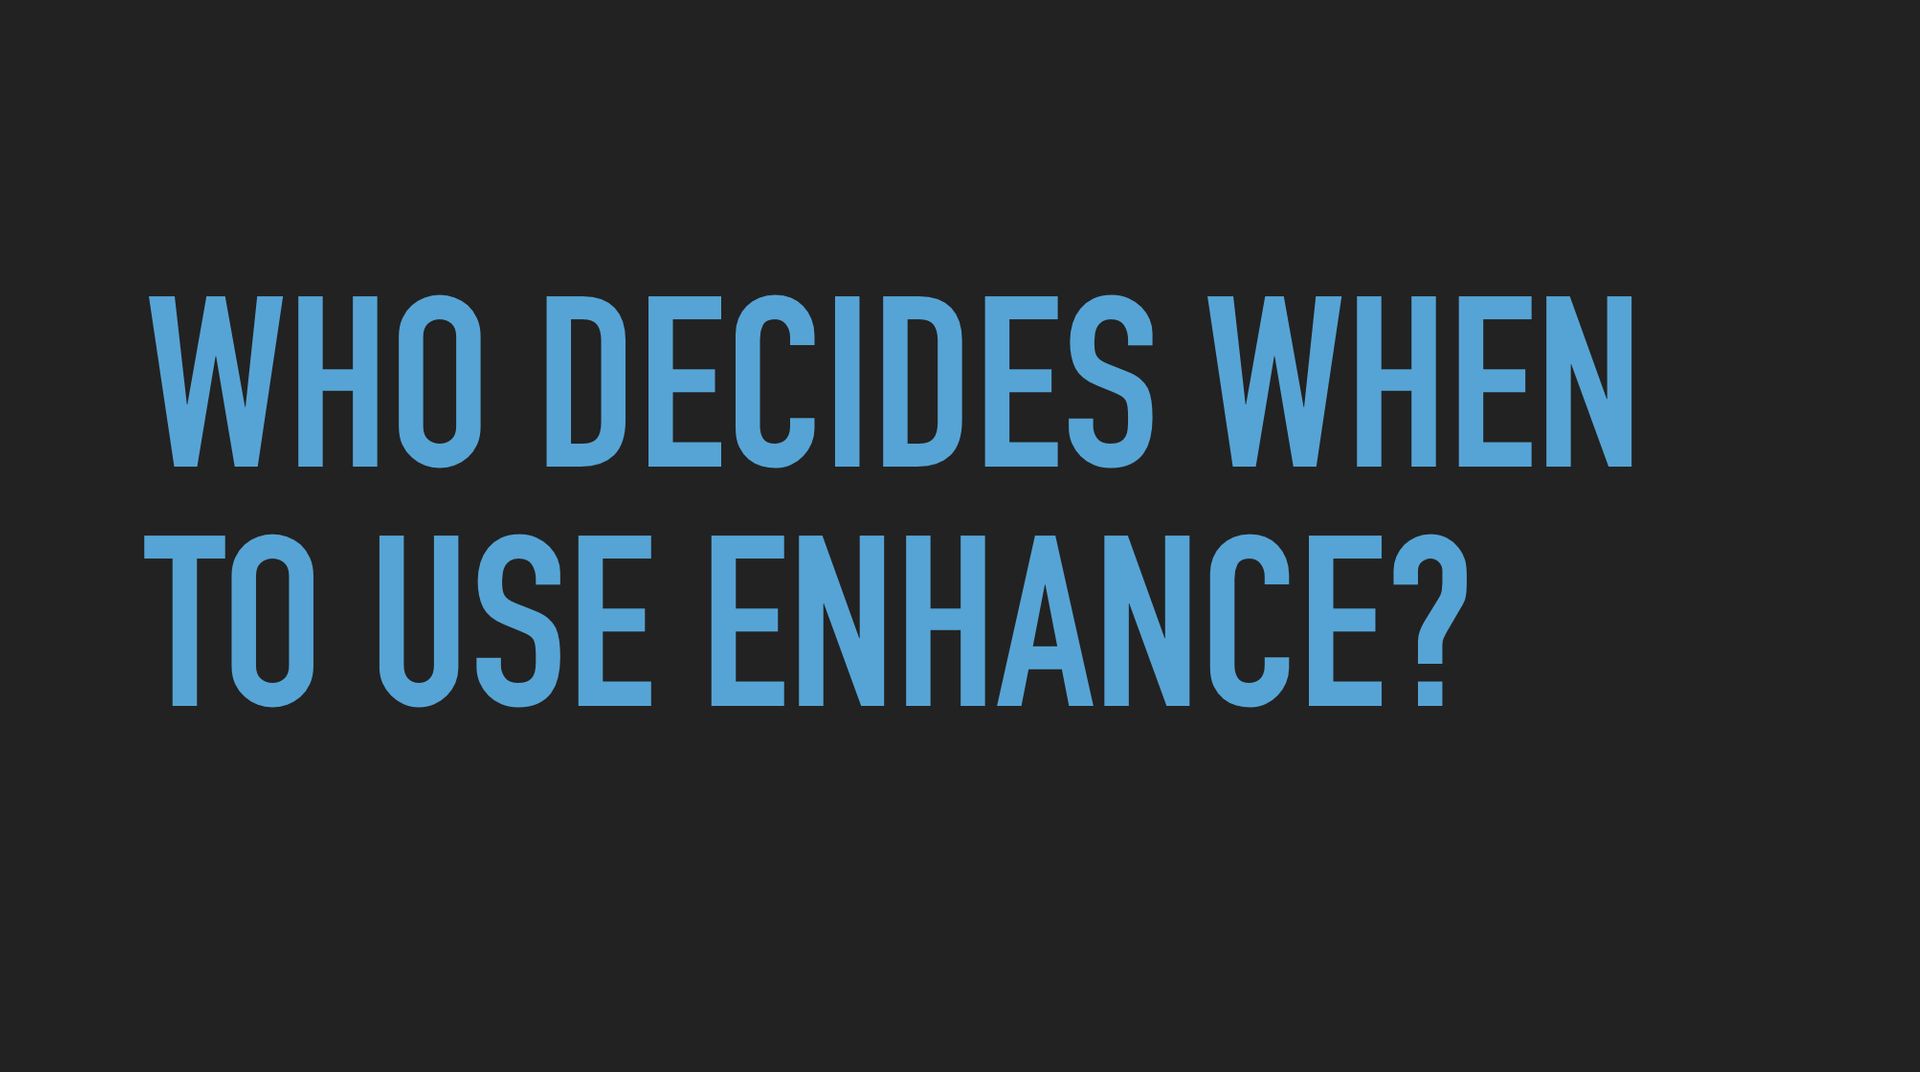 Slide text: Who decides when to use enhance?